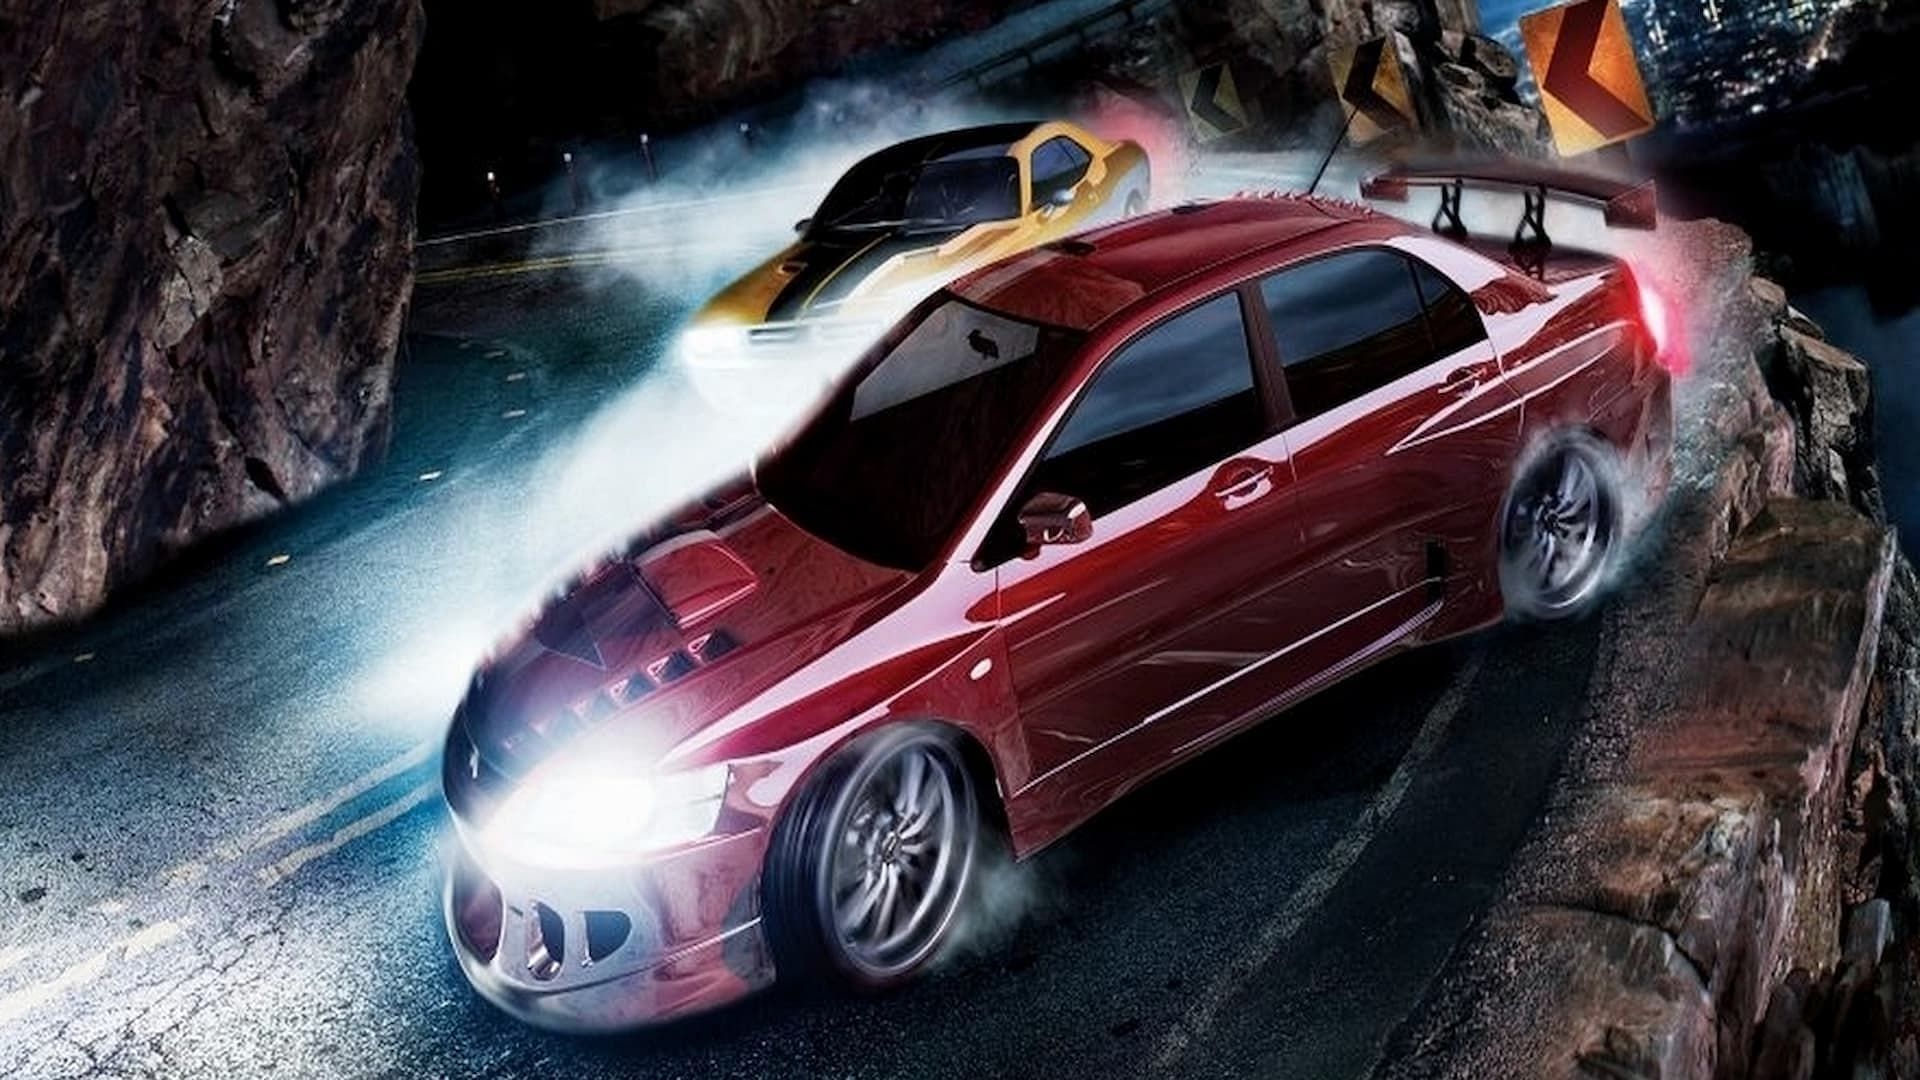 All Need For Speed games on PC, Ranked (Image via Electronic Arts)